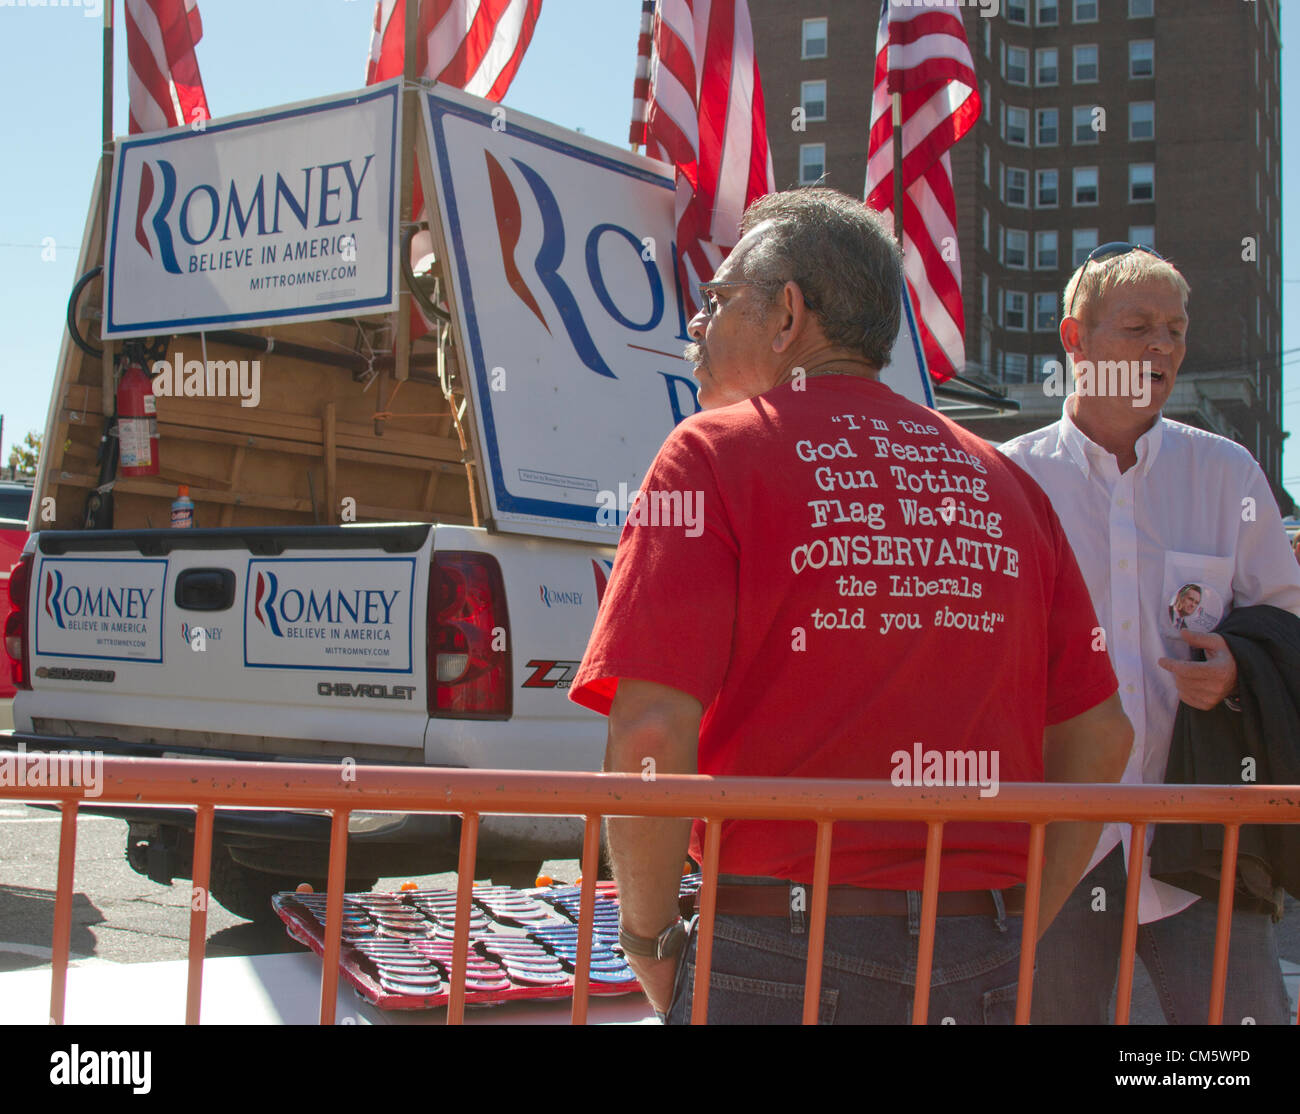 Asheville, North Carolina, USA. 11th October 2012. Man Wearing Conservative T-Shirt saying 'I'm the God Fearing, Gun Toting, Flag Waving Consevative the Liberals told you about? while syanding next to a Mtt Romney campaign truck at a Mitt Romney Campaign Rally in Asheville, North Carolina, USA, on October 11, 2012 Stock Photo